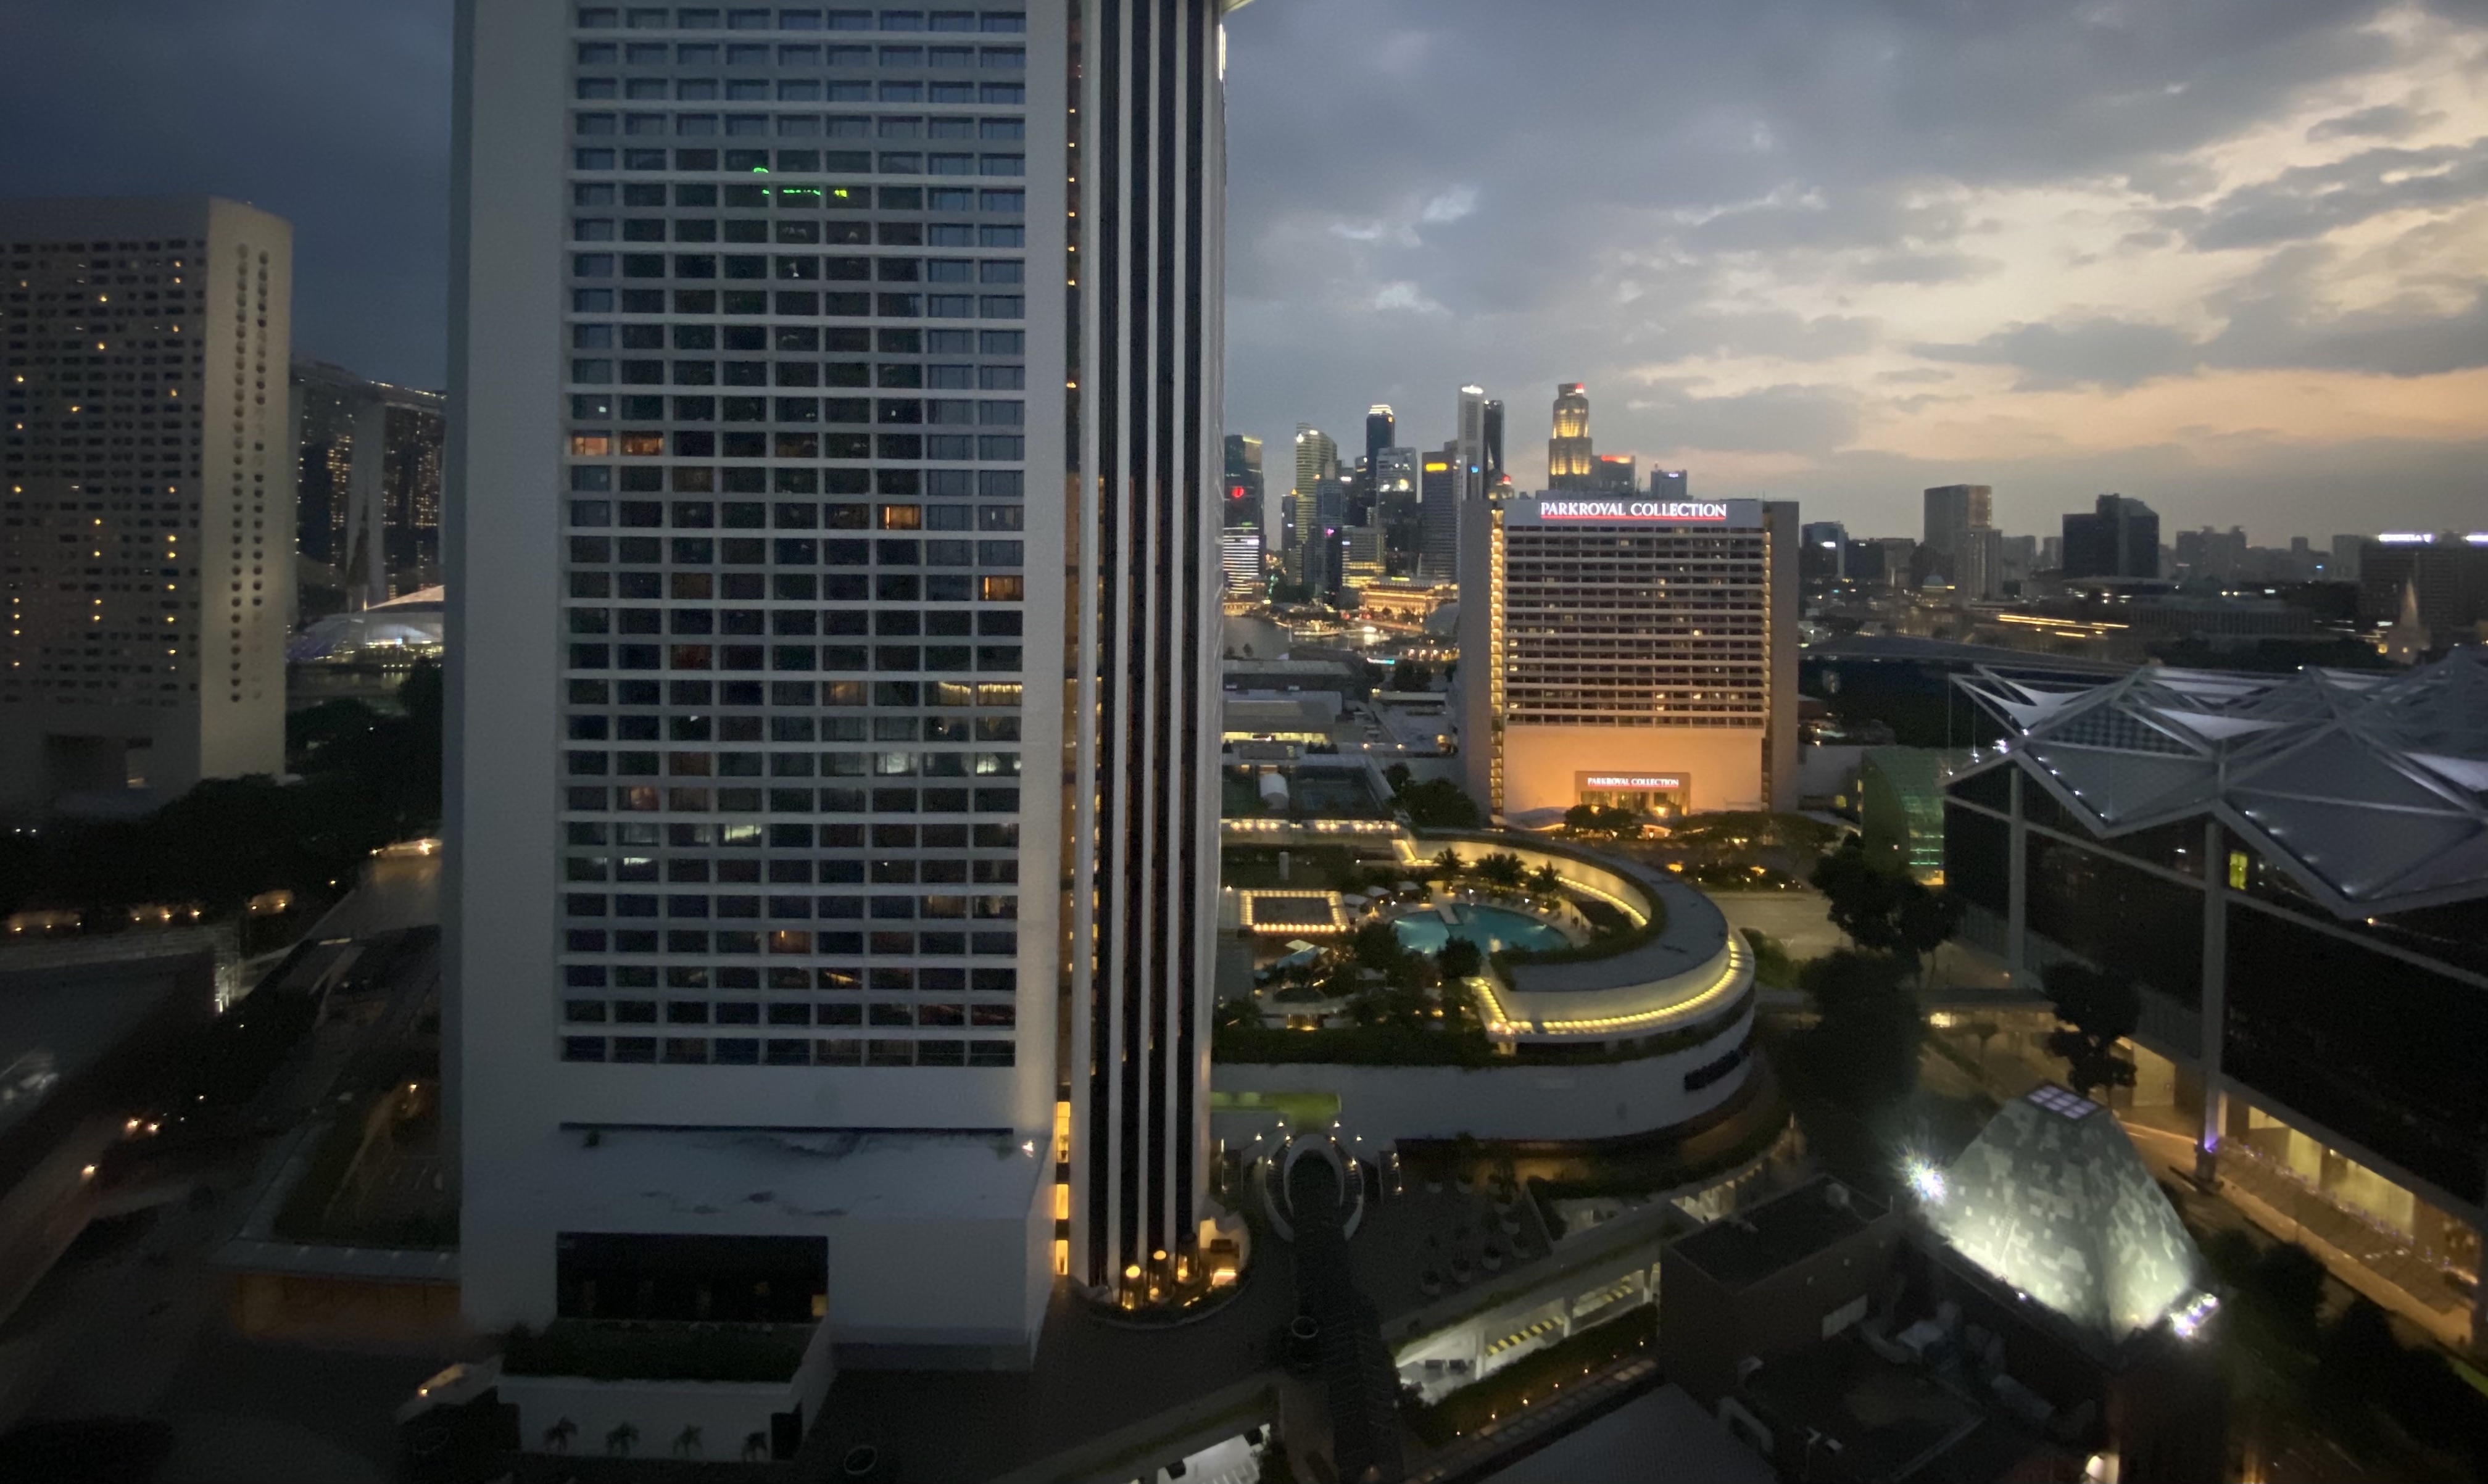 A view from a hotel foom (with Merlion in the distance)